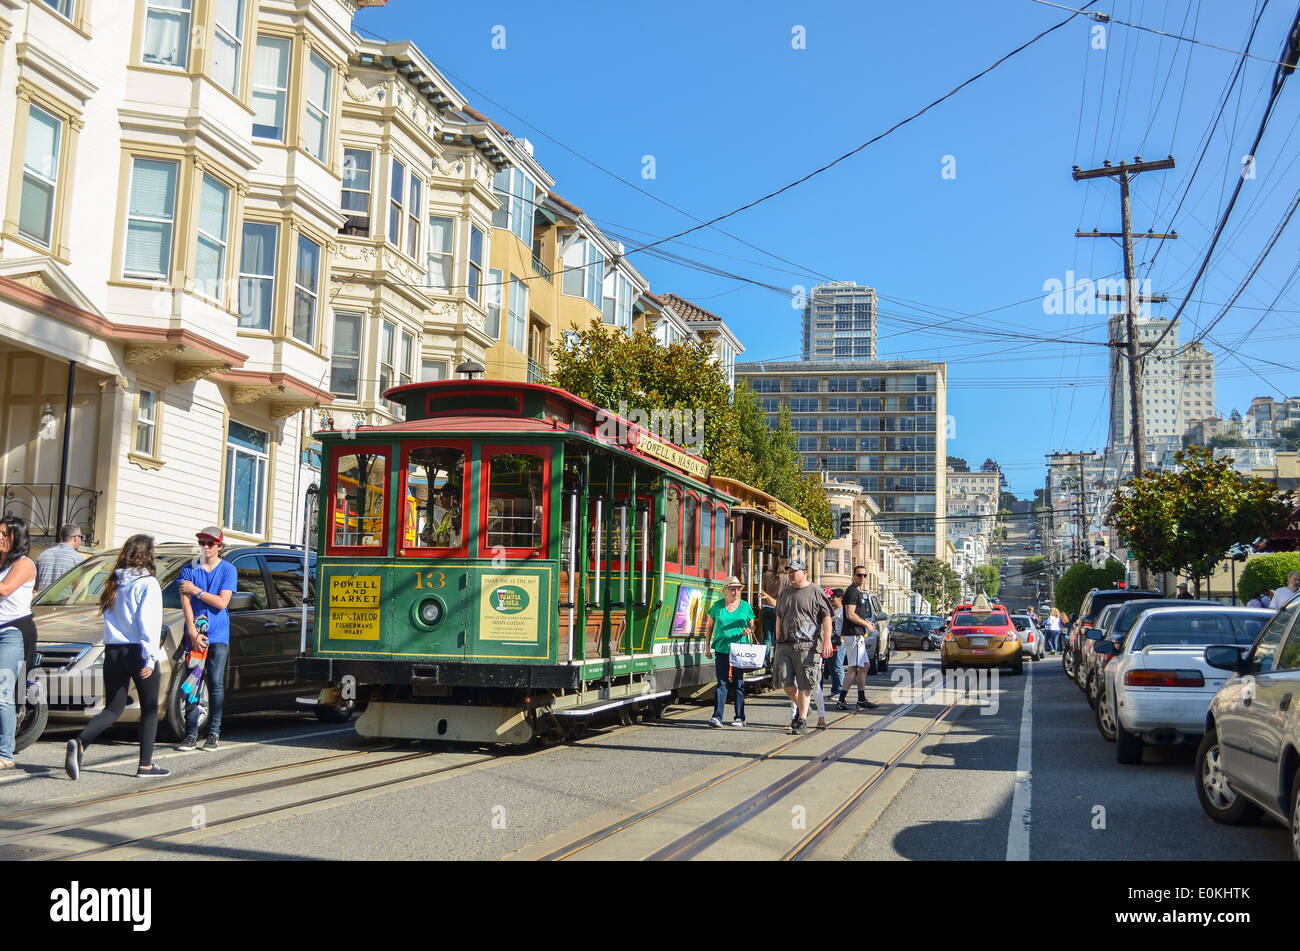 Cable car on halt on a street in San francisco surrounded by tourists Stock Photo